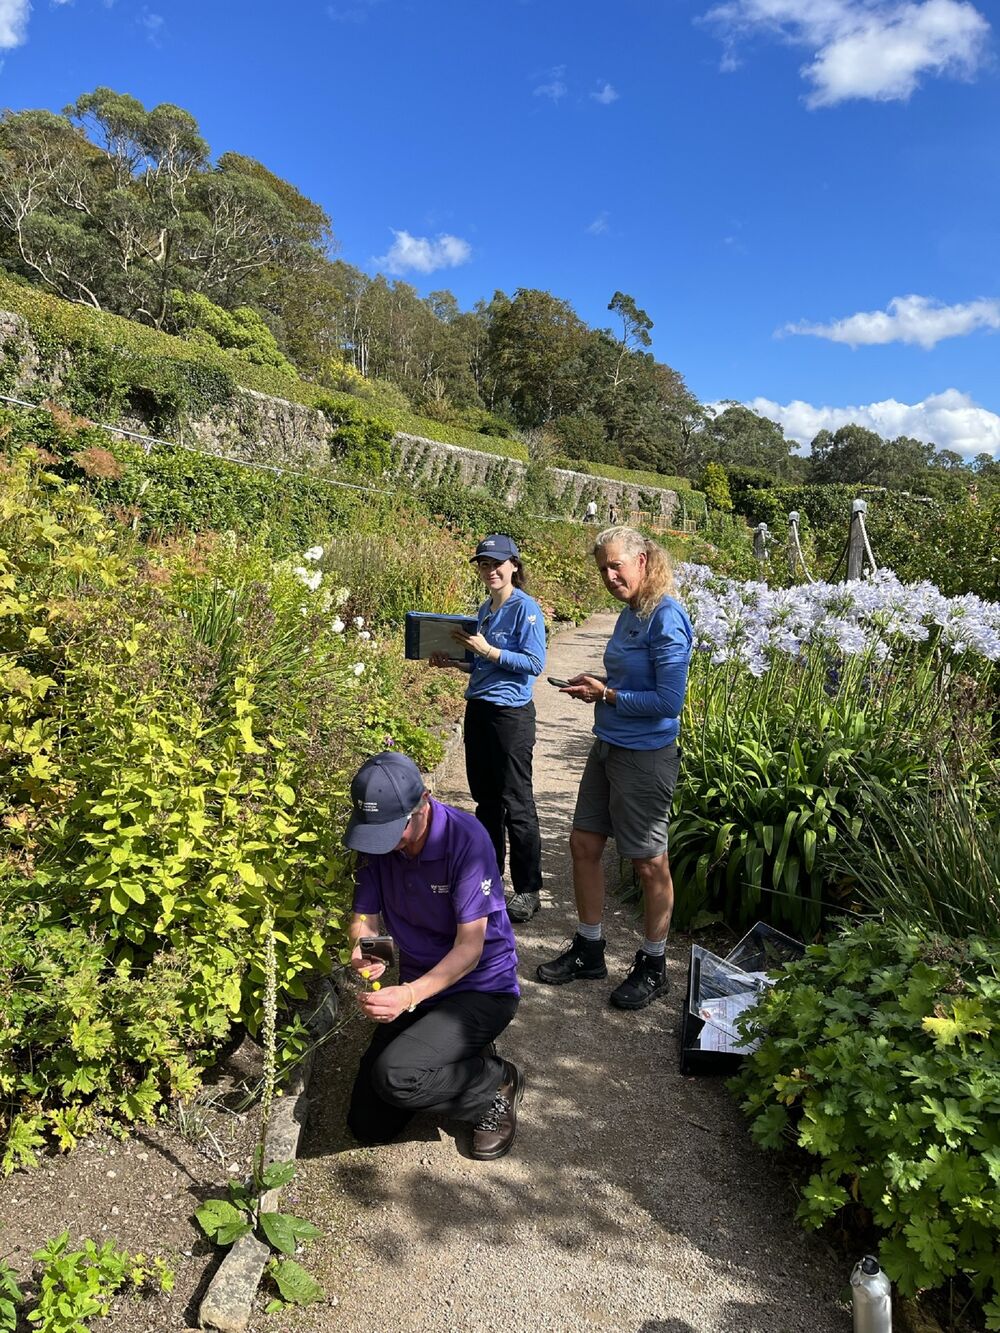 Three people are at work recording plants beside a path in Inverewe Garden. The person in the foreground kneels down to take a photo of a small yellow flower with their phone.